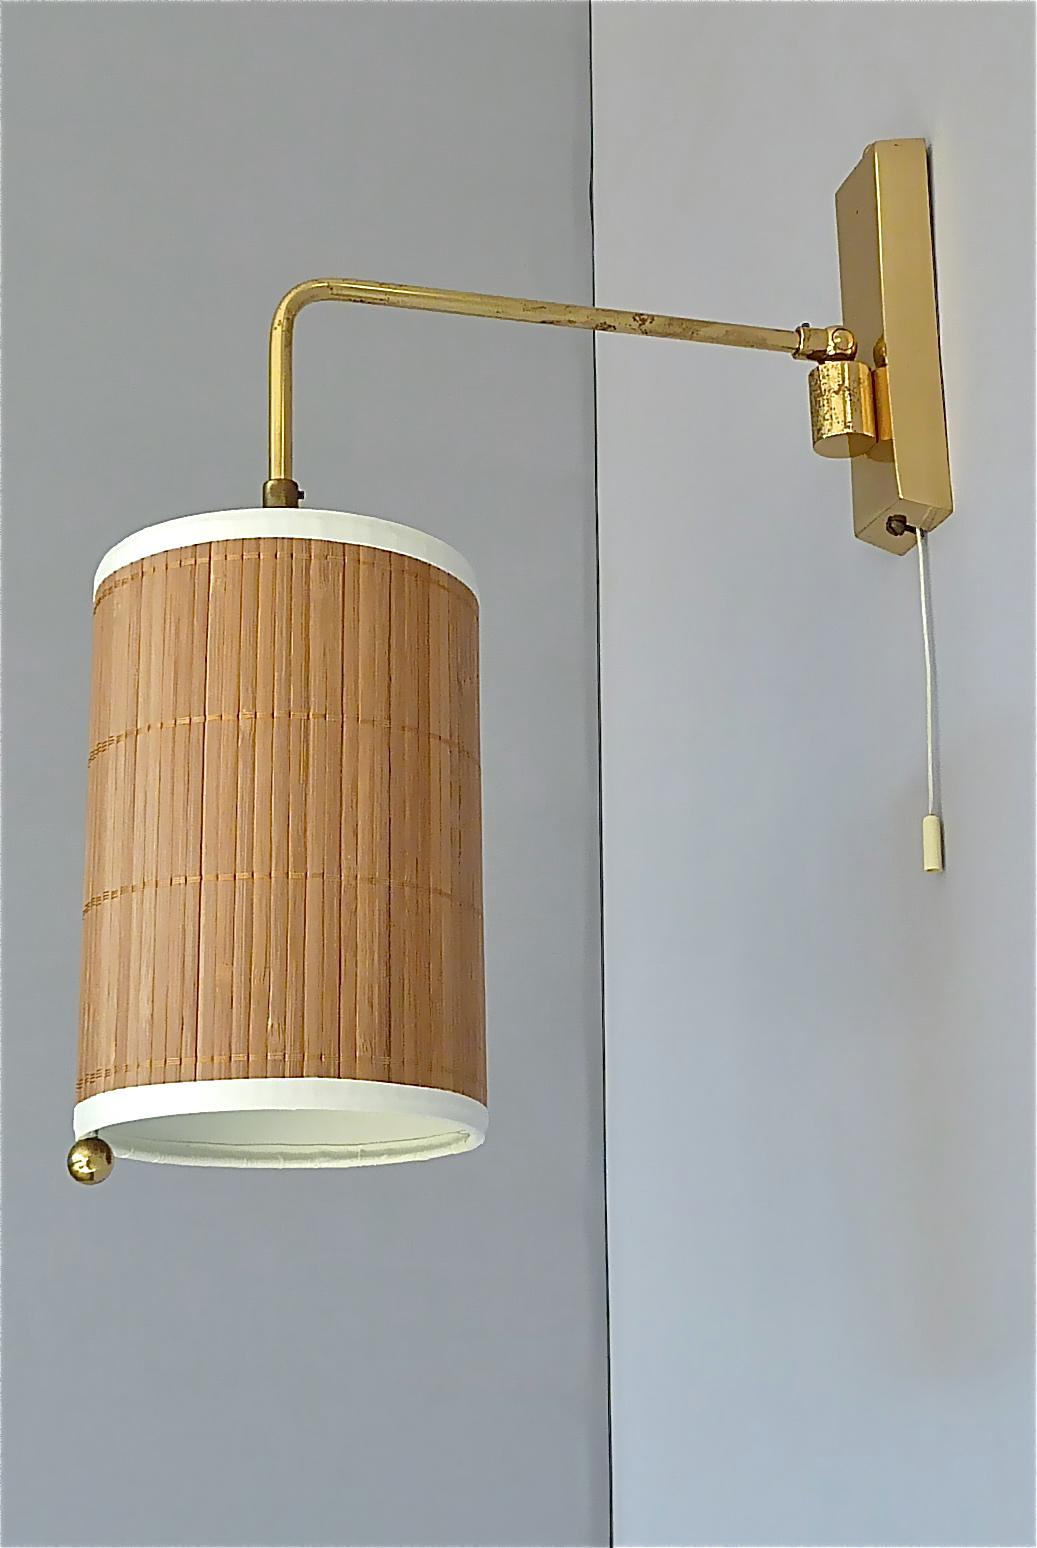 Amazing Scandinavian / Austrian wall lamp in Paavo Tynell Taito Oy / Kalmar style, circa 1955. The height and side adjustable wall lamp with string switch has a solid patinated brass base with movable arm for multiple light positions and a beautiful